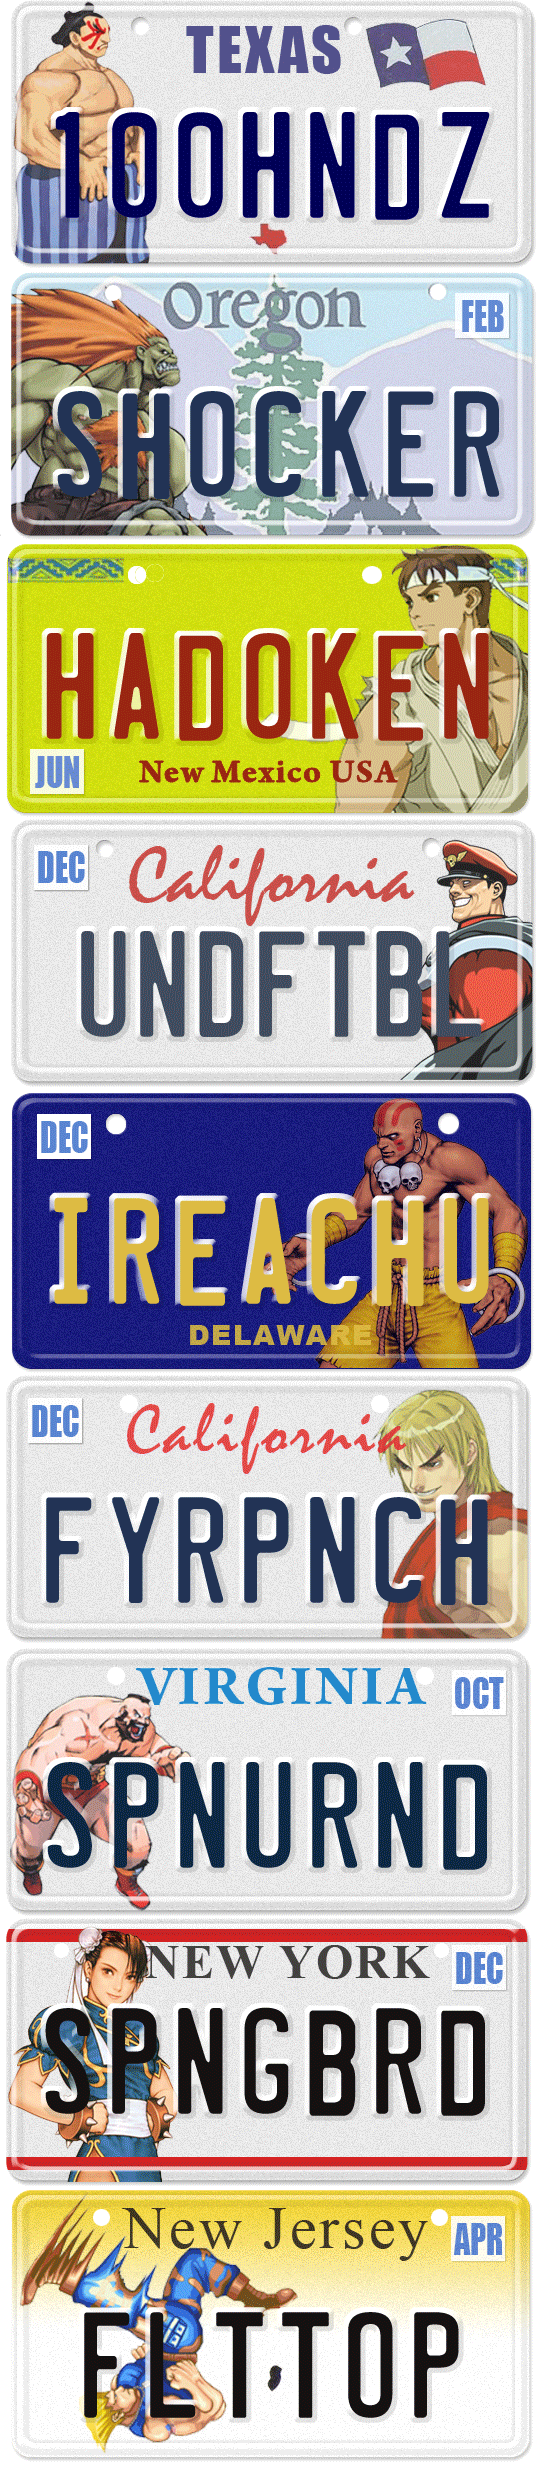 Street Fighter License Plates: What If Your Favorite World Fighters Had Vanity Plates?